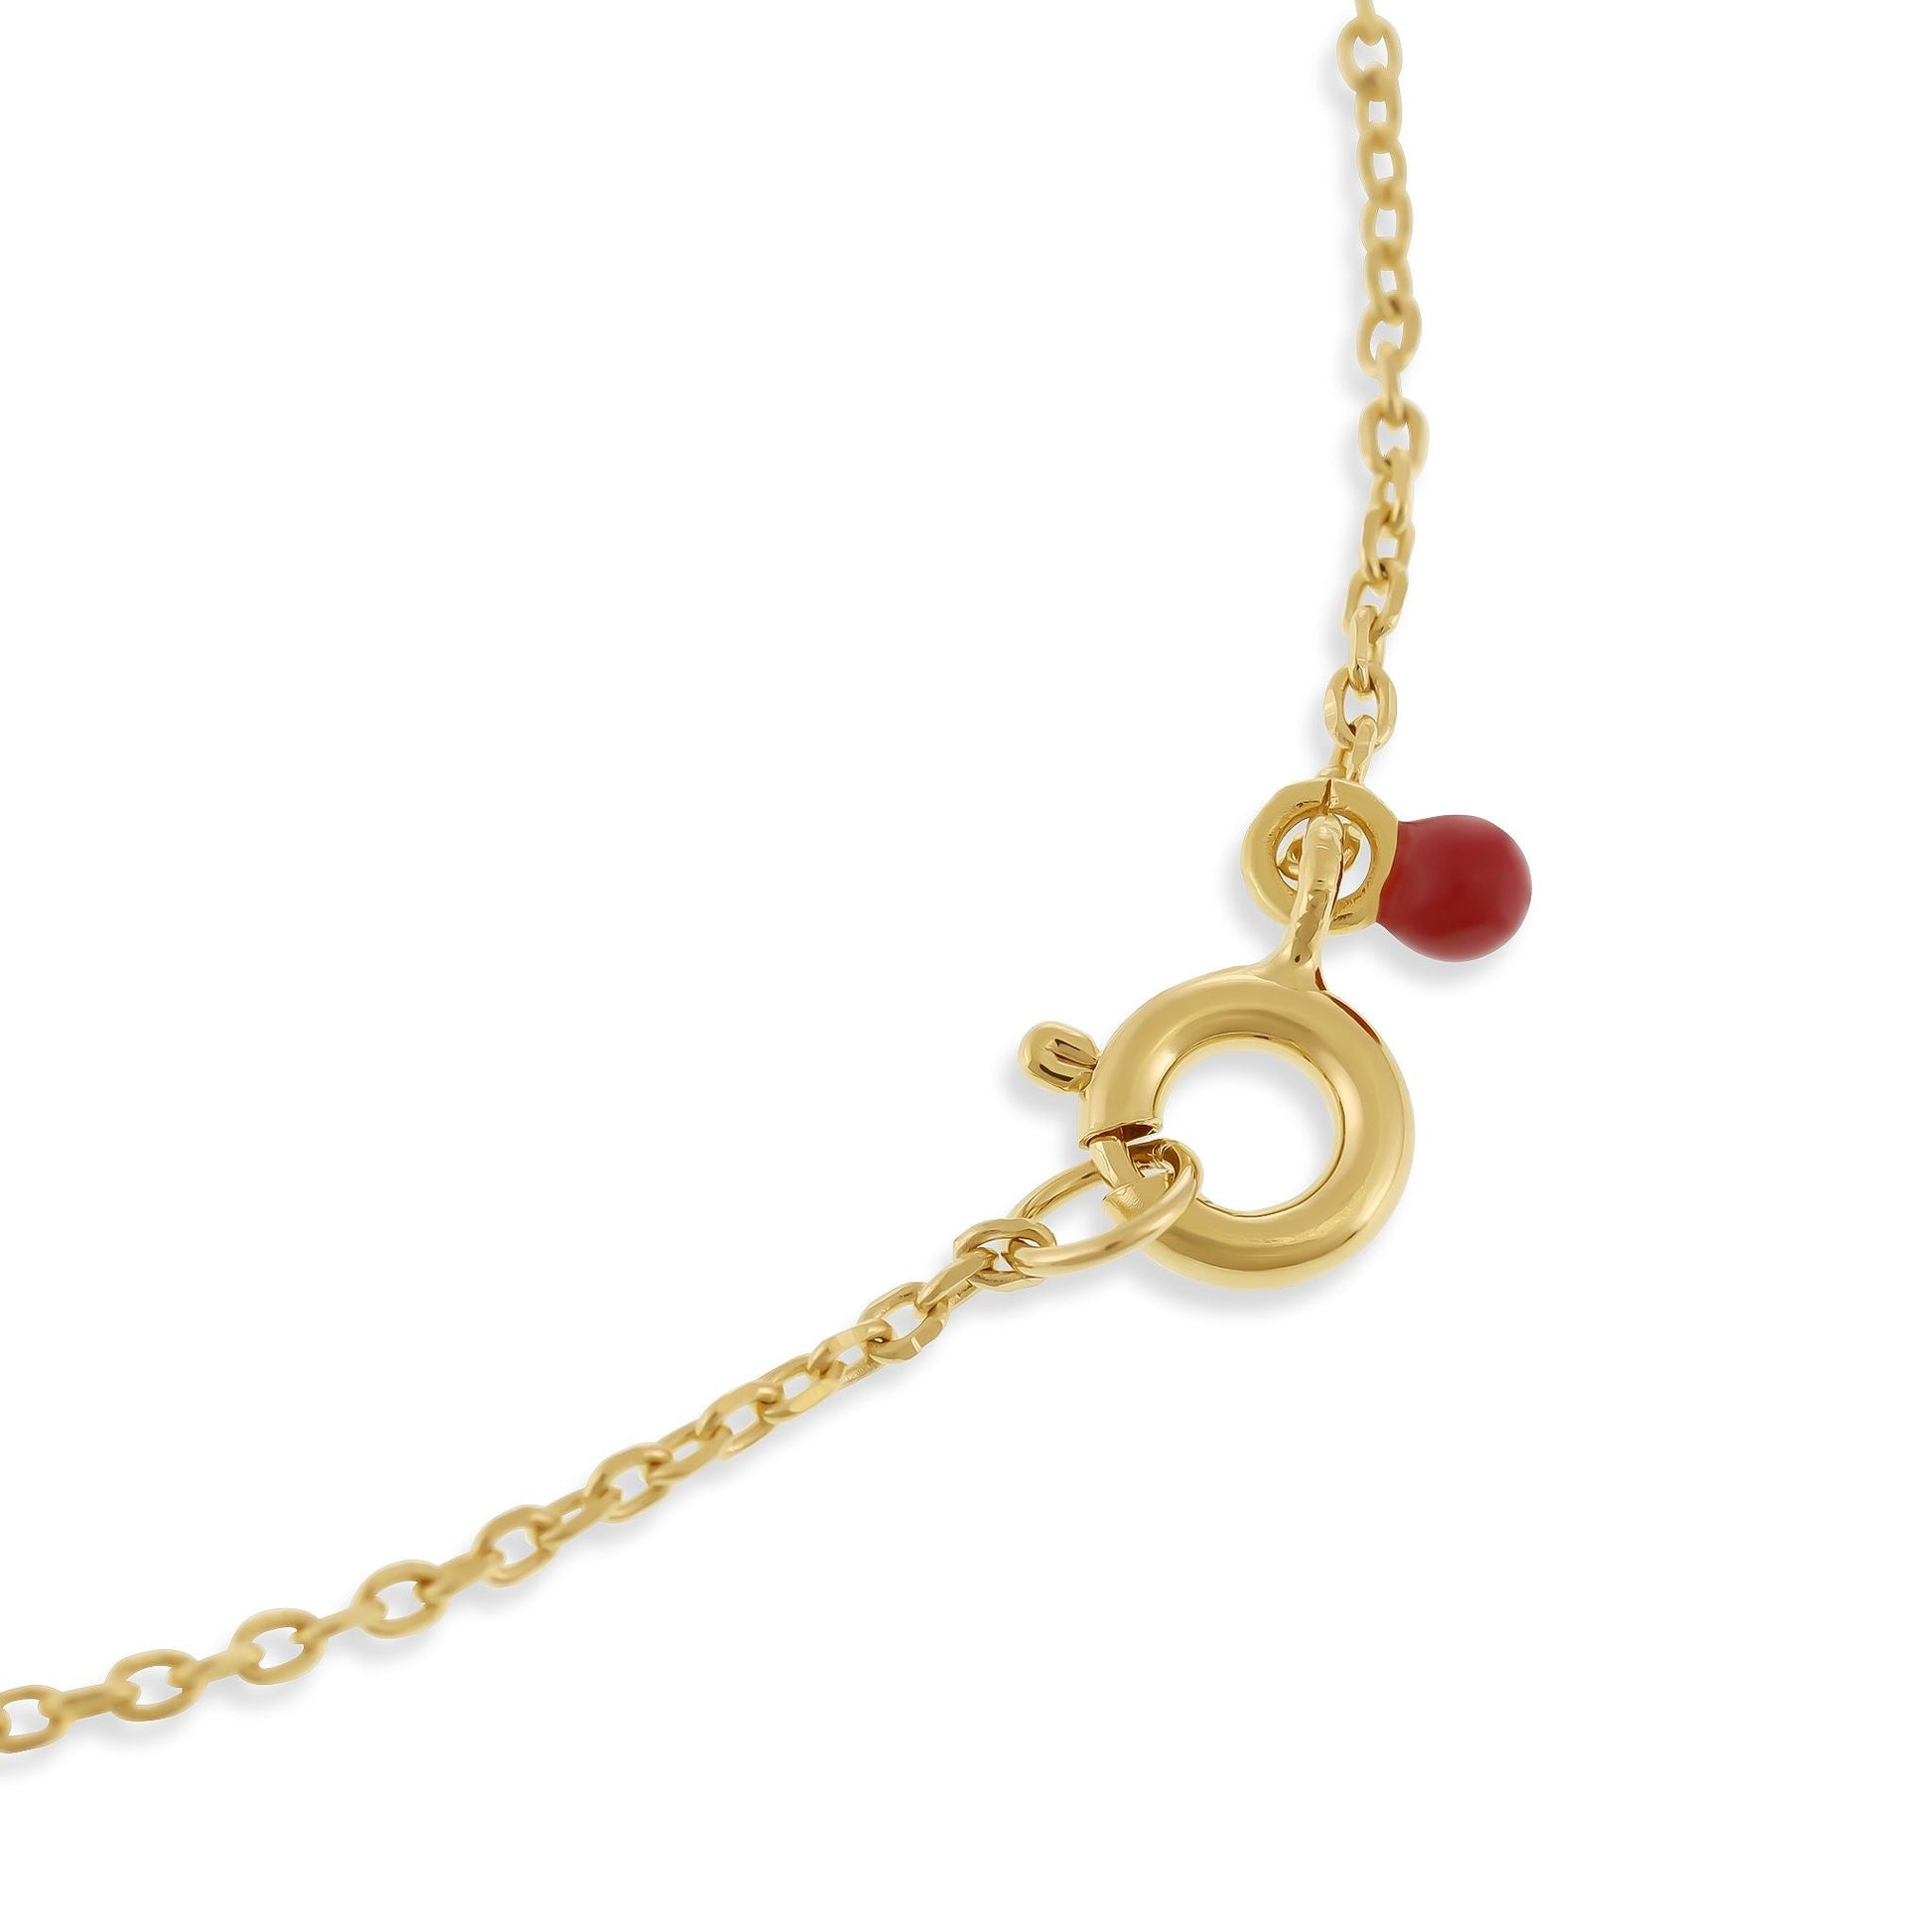 18ct 1 Micron gold plated necklace with Burgandy enamel twist PNK3001B-1 - FJewellery